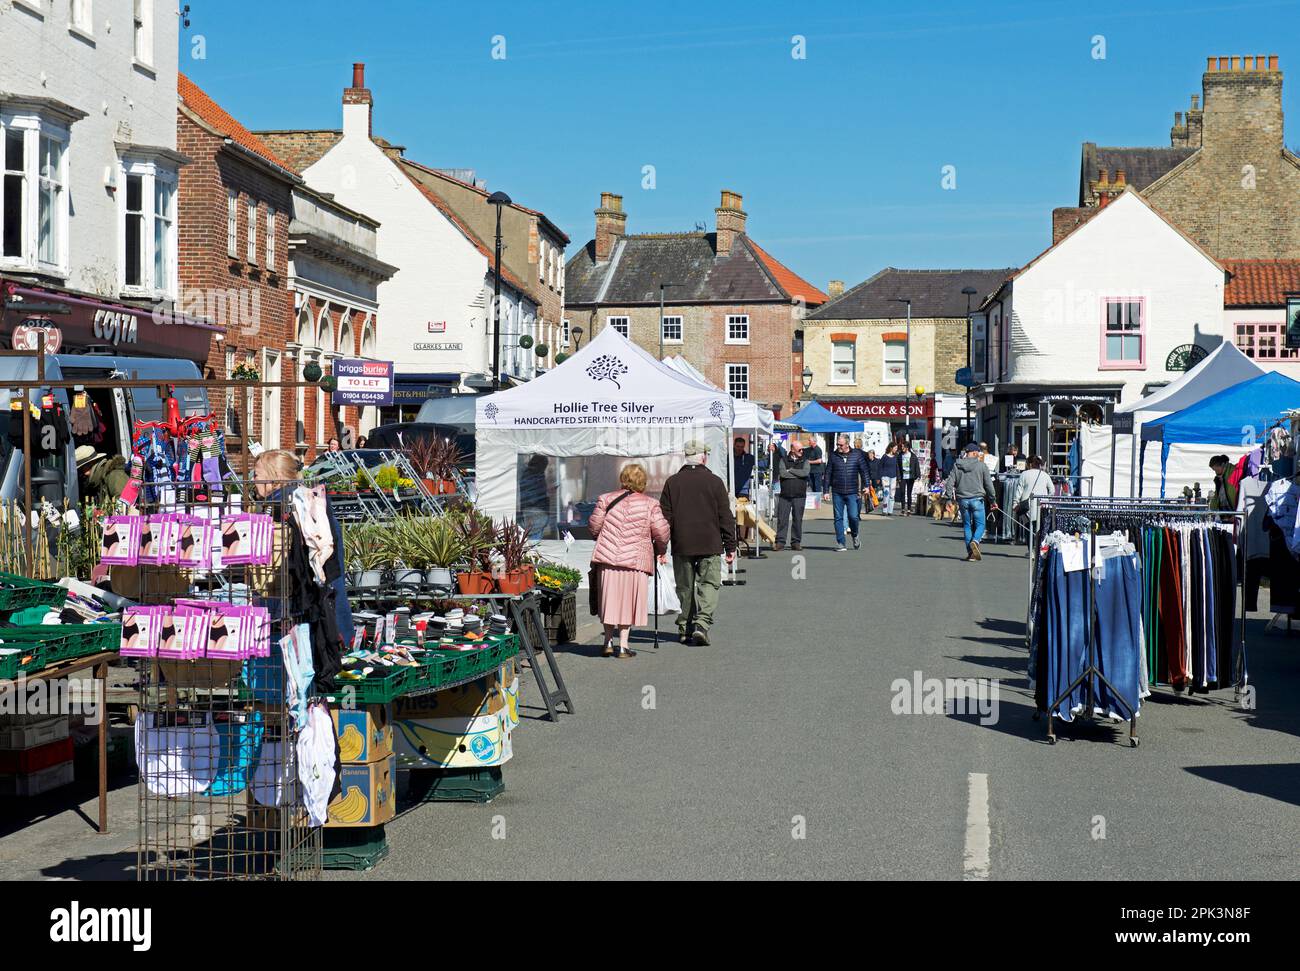 Shoppers on market day in Pickering, East Yorkshire, England UK Stock Photo